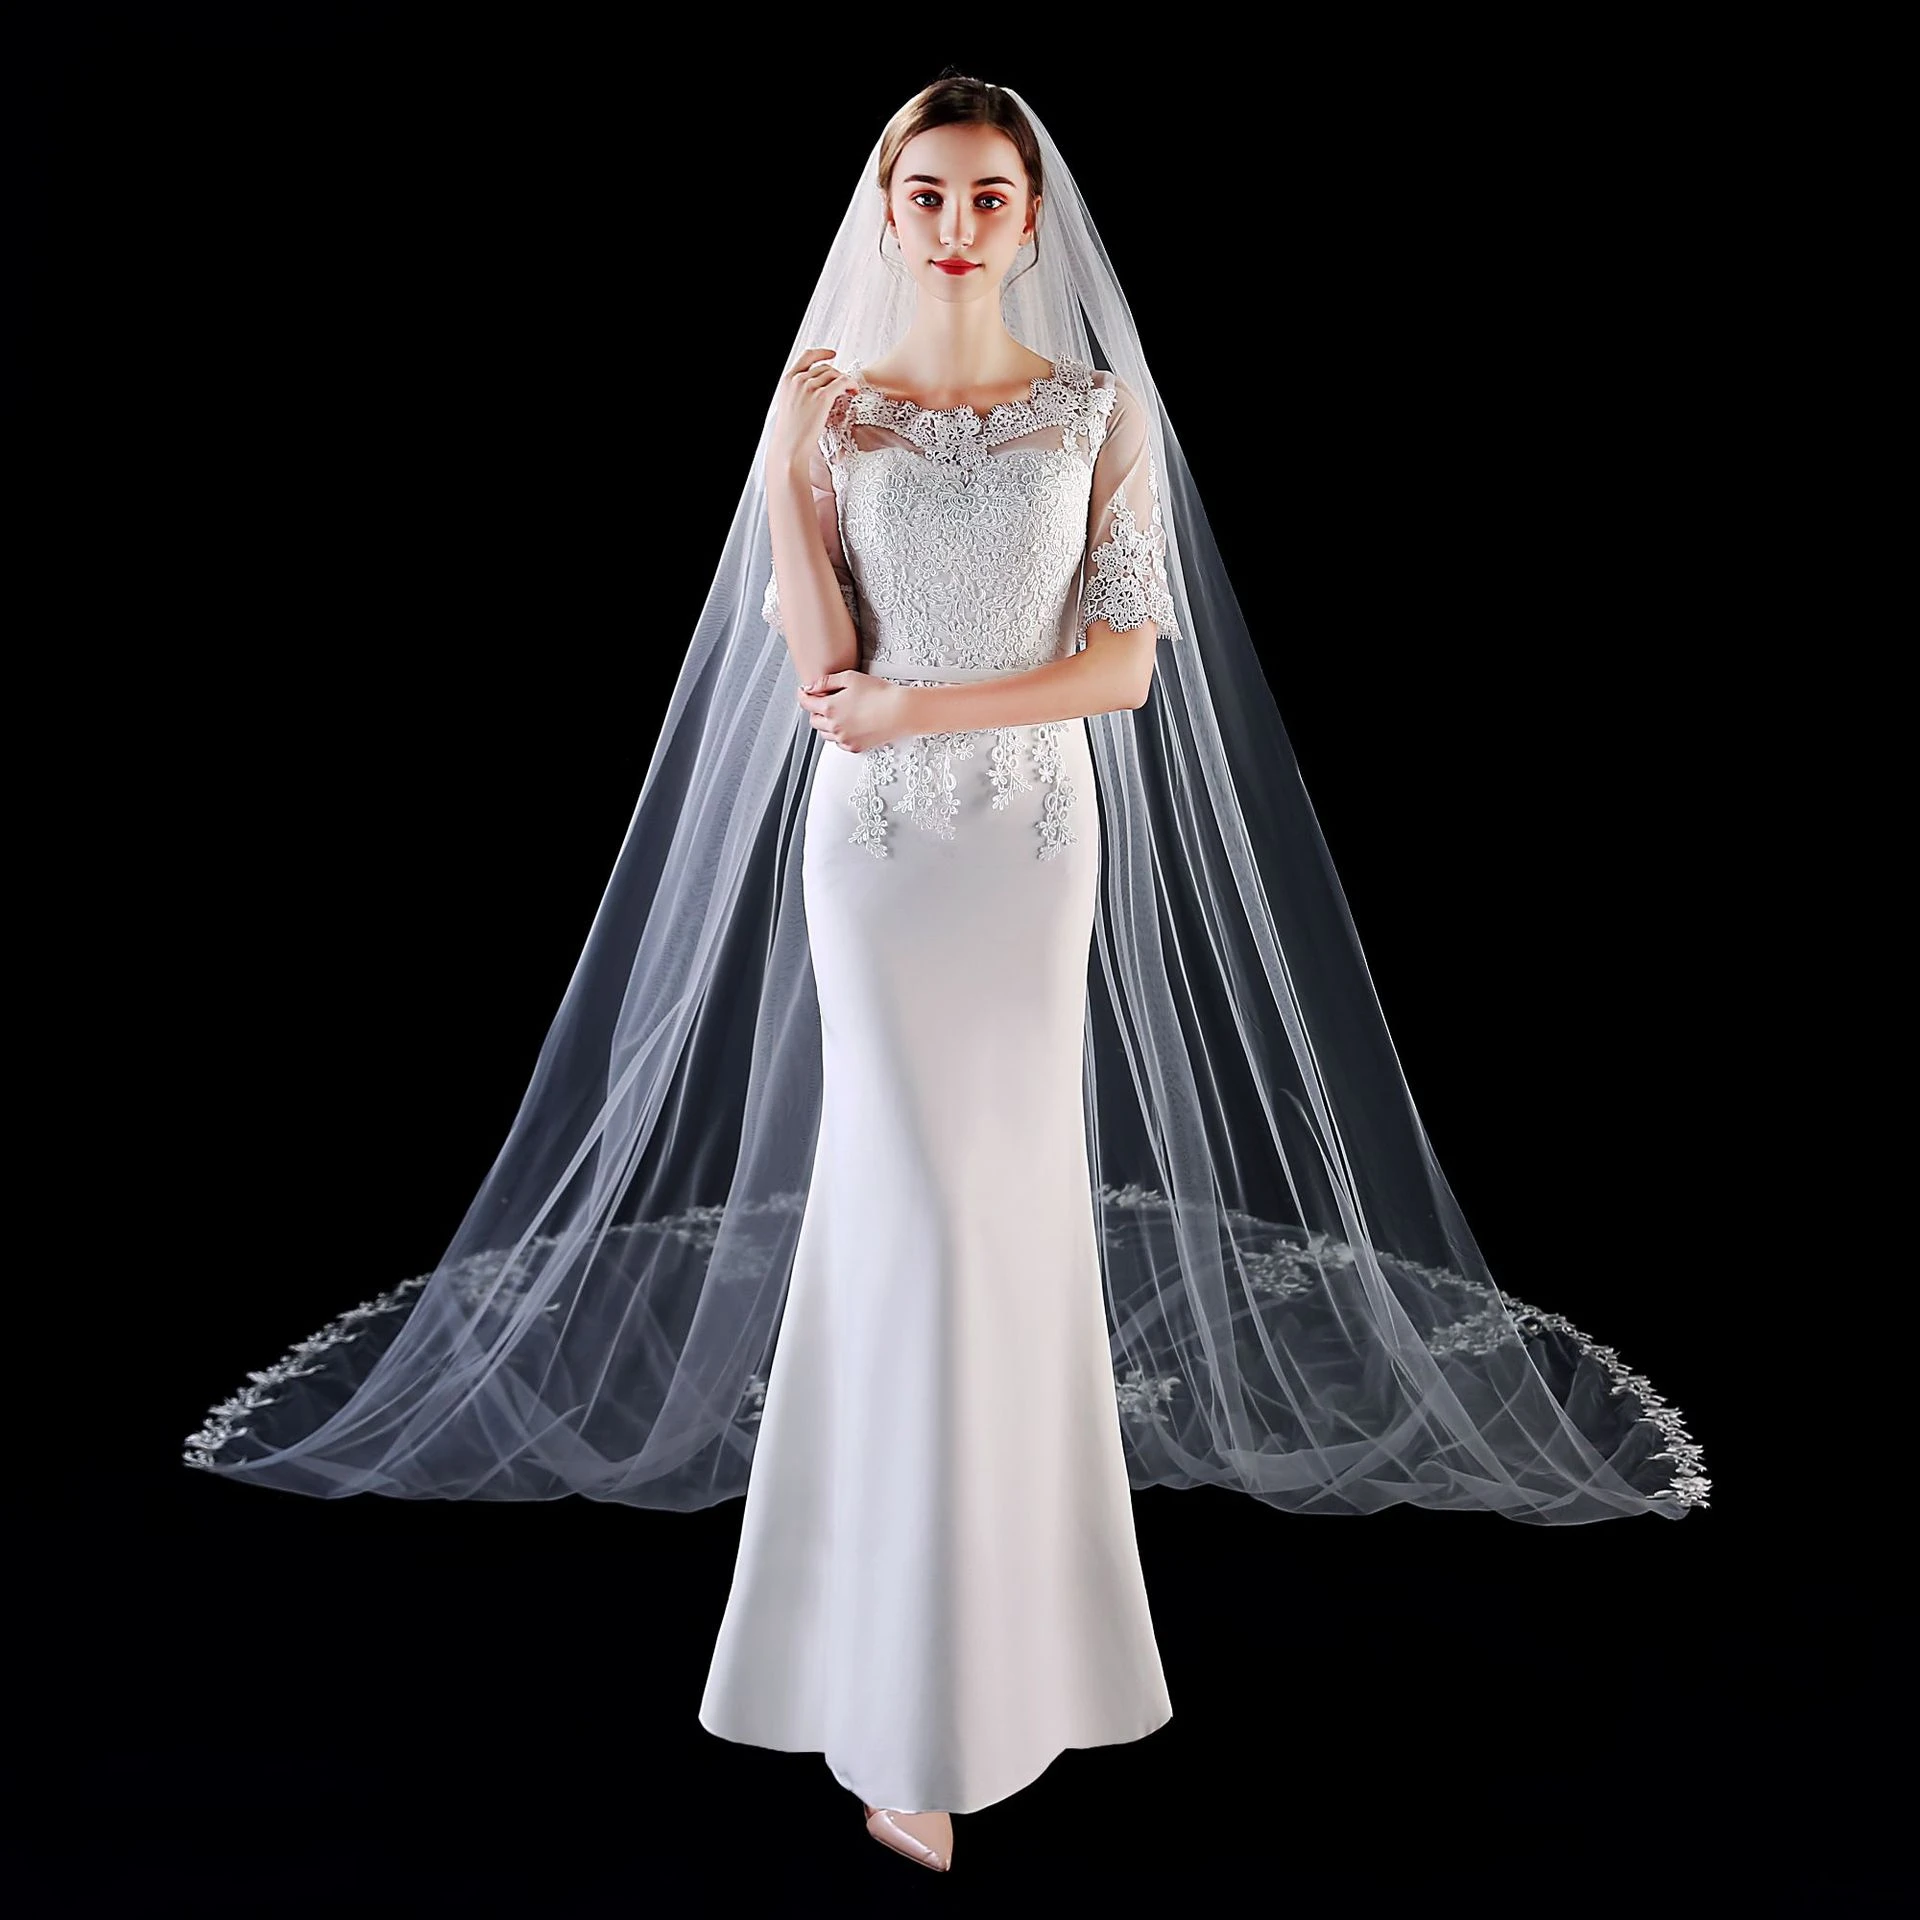 ROMANTIC Bride Sequined Long Veils Bridal Veil with Comb Mantilla Hair Accessories for Wedding